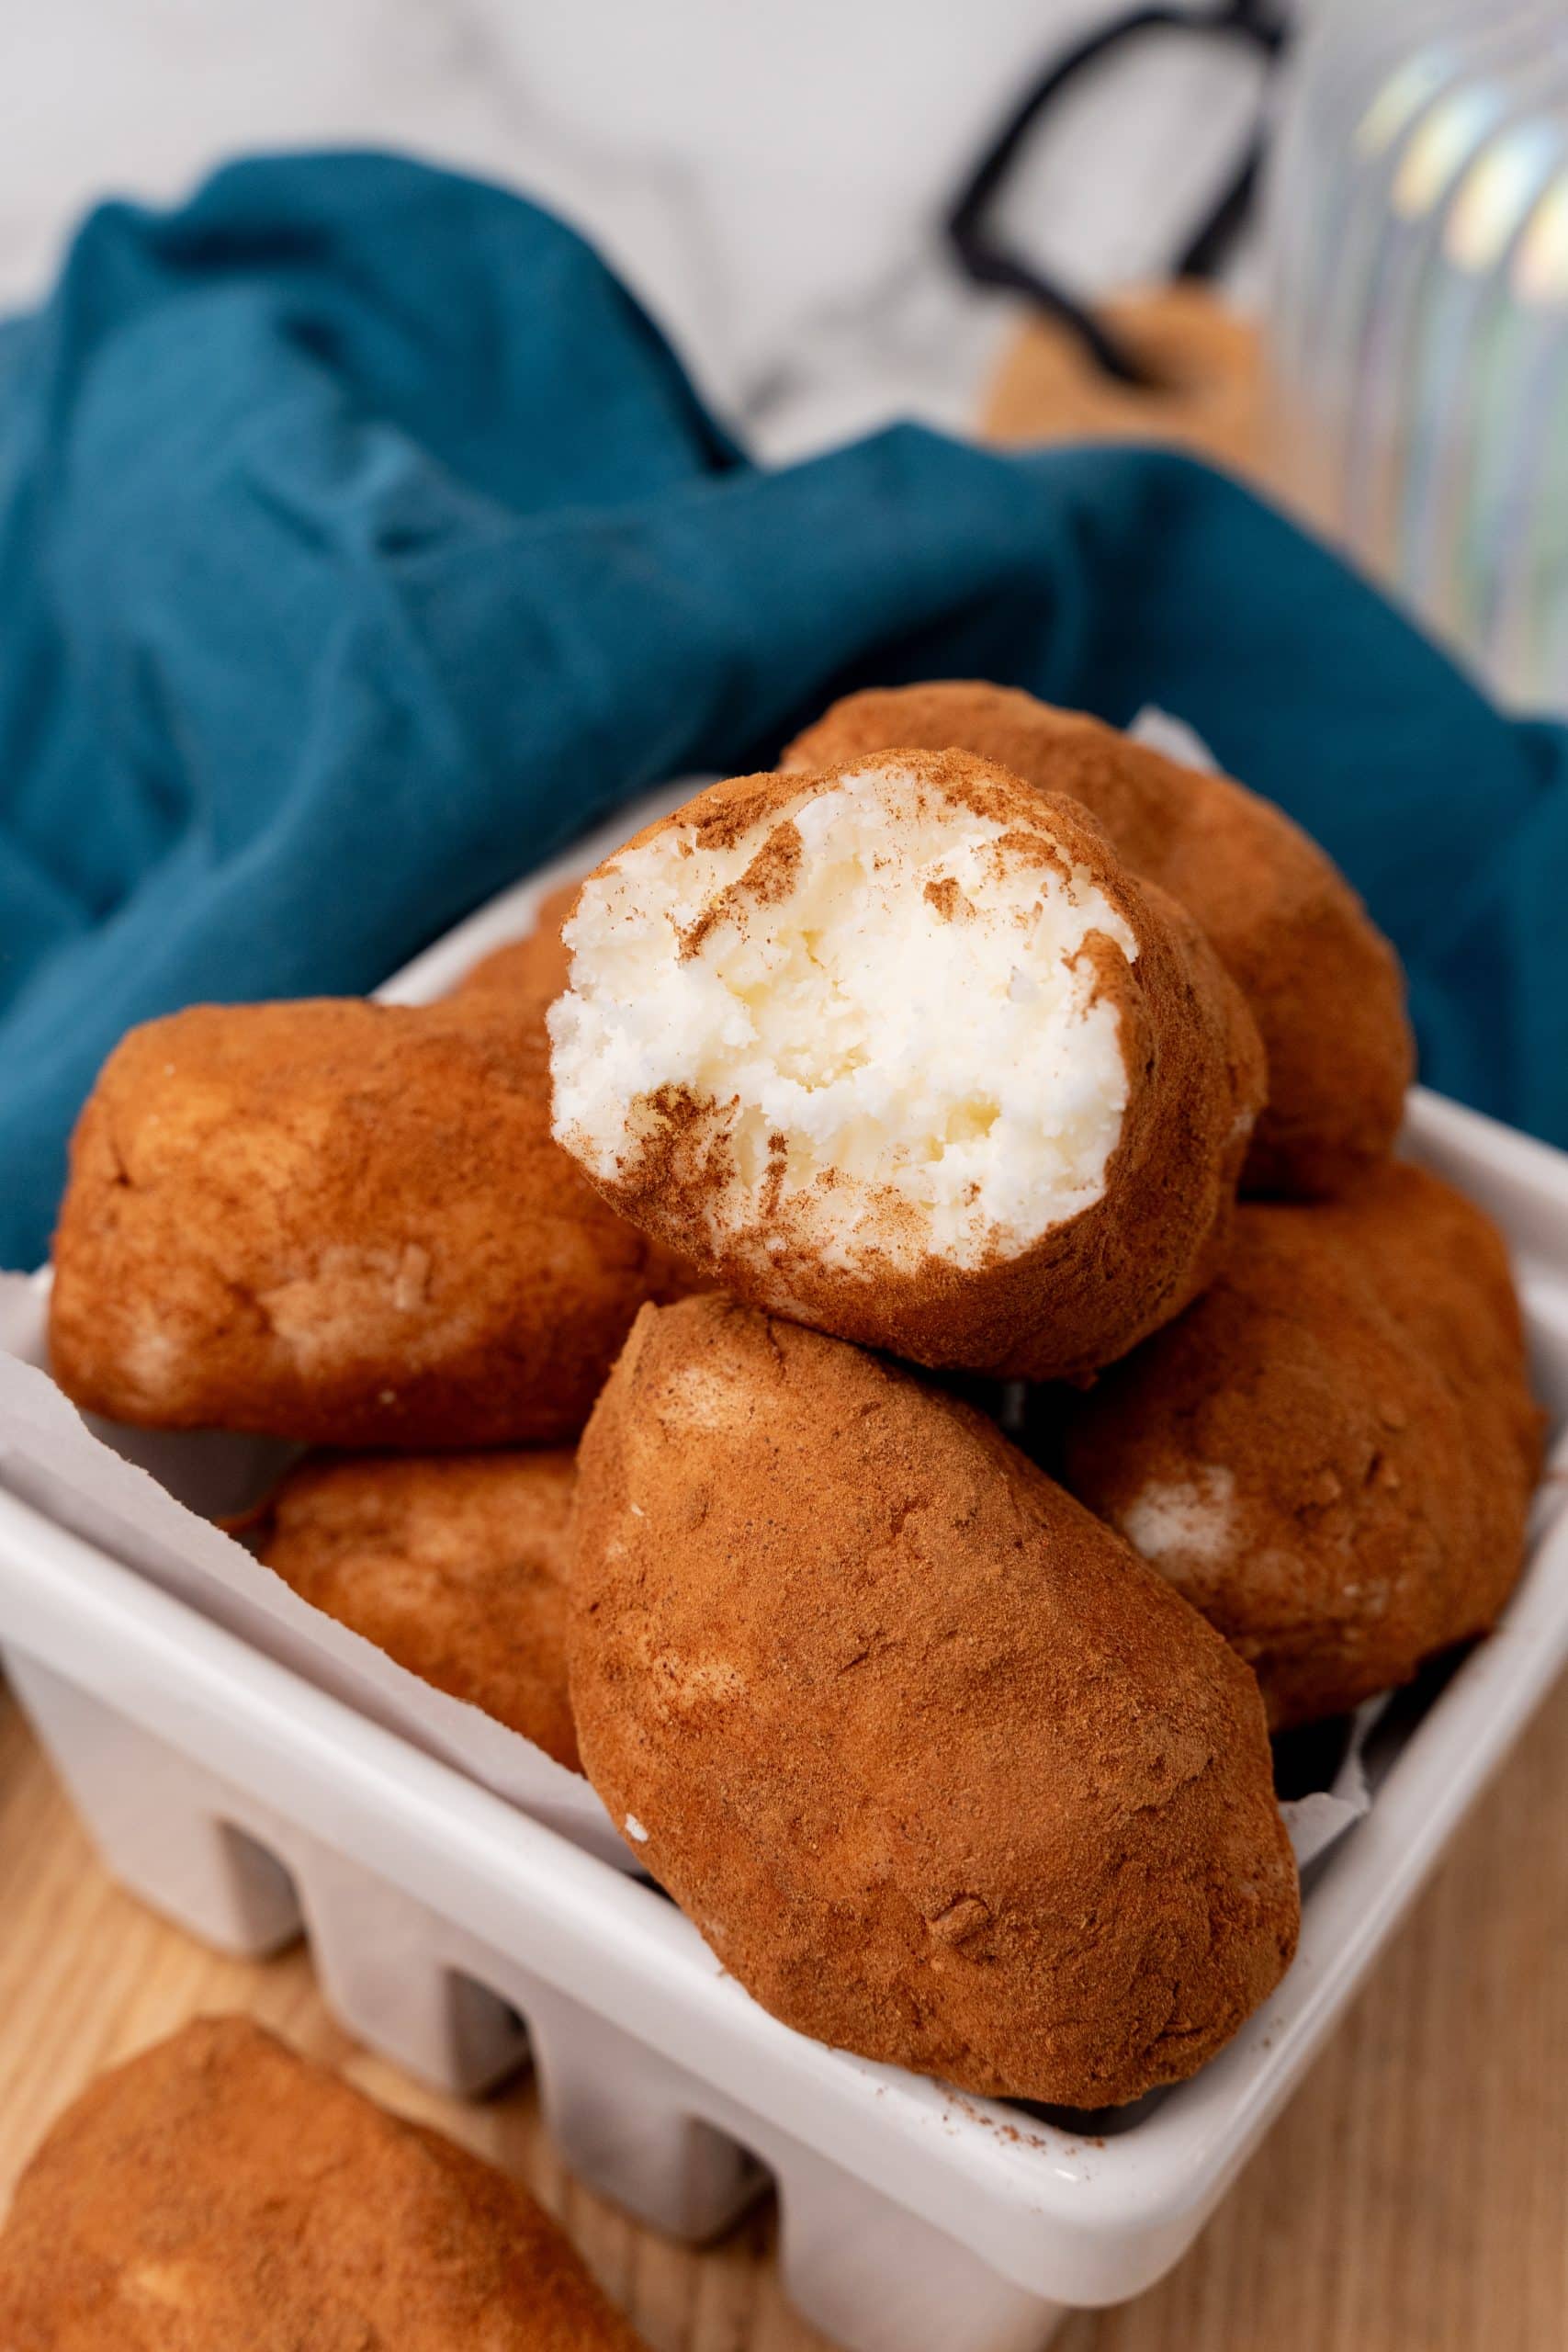 a bitten piece of potato candy resting on top of other whole cinnamon coated coconut candies in a white basket